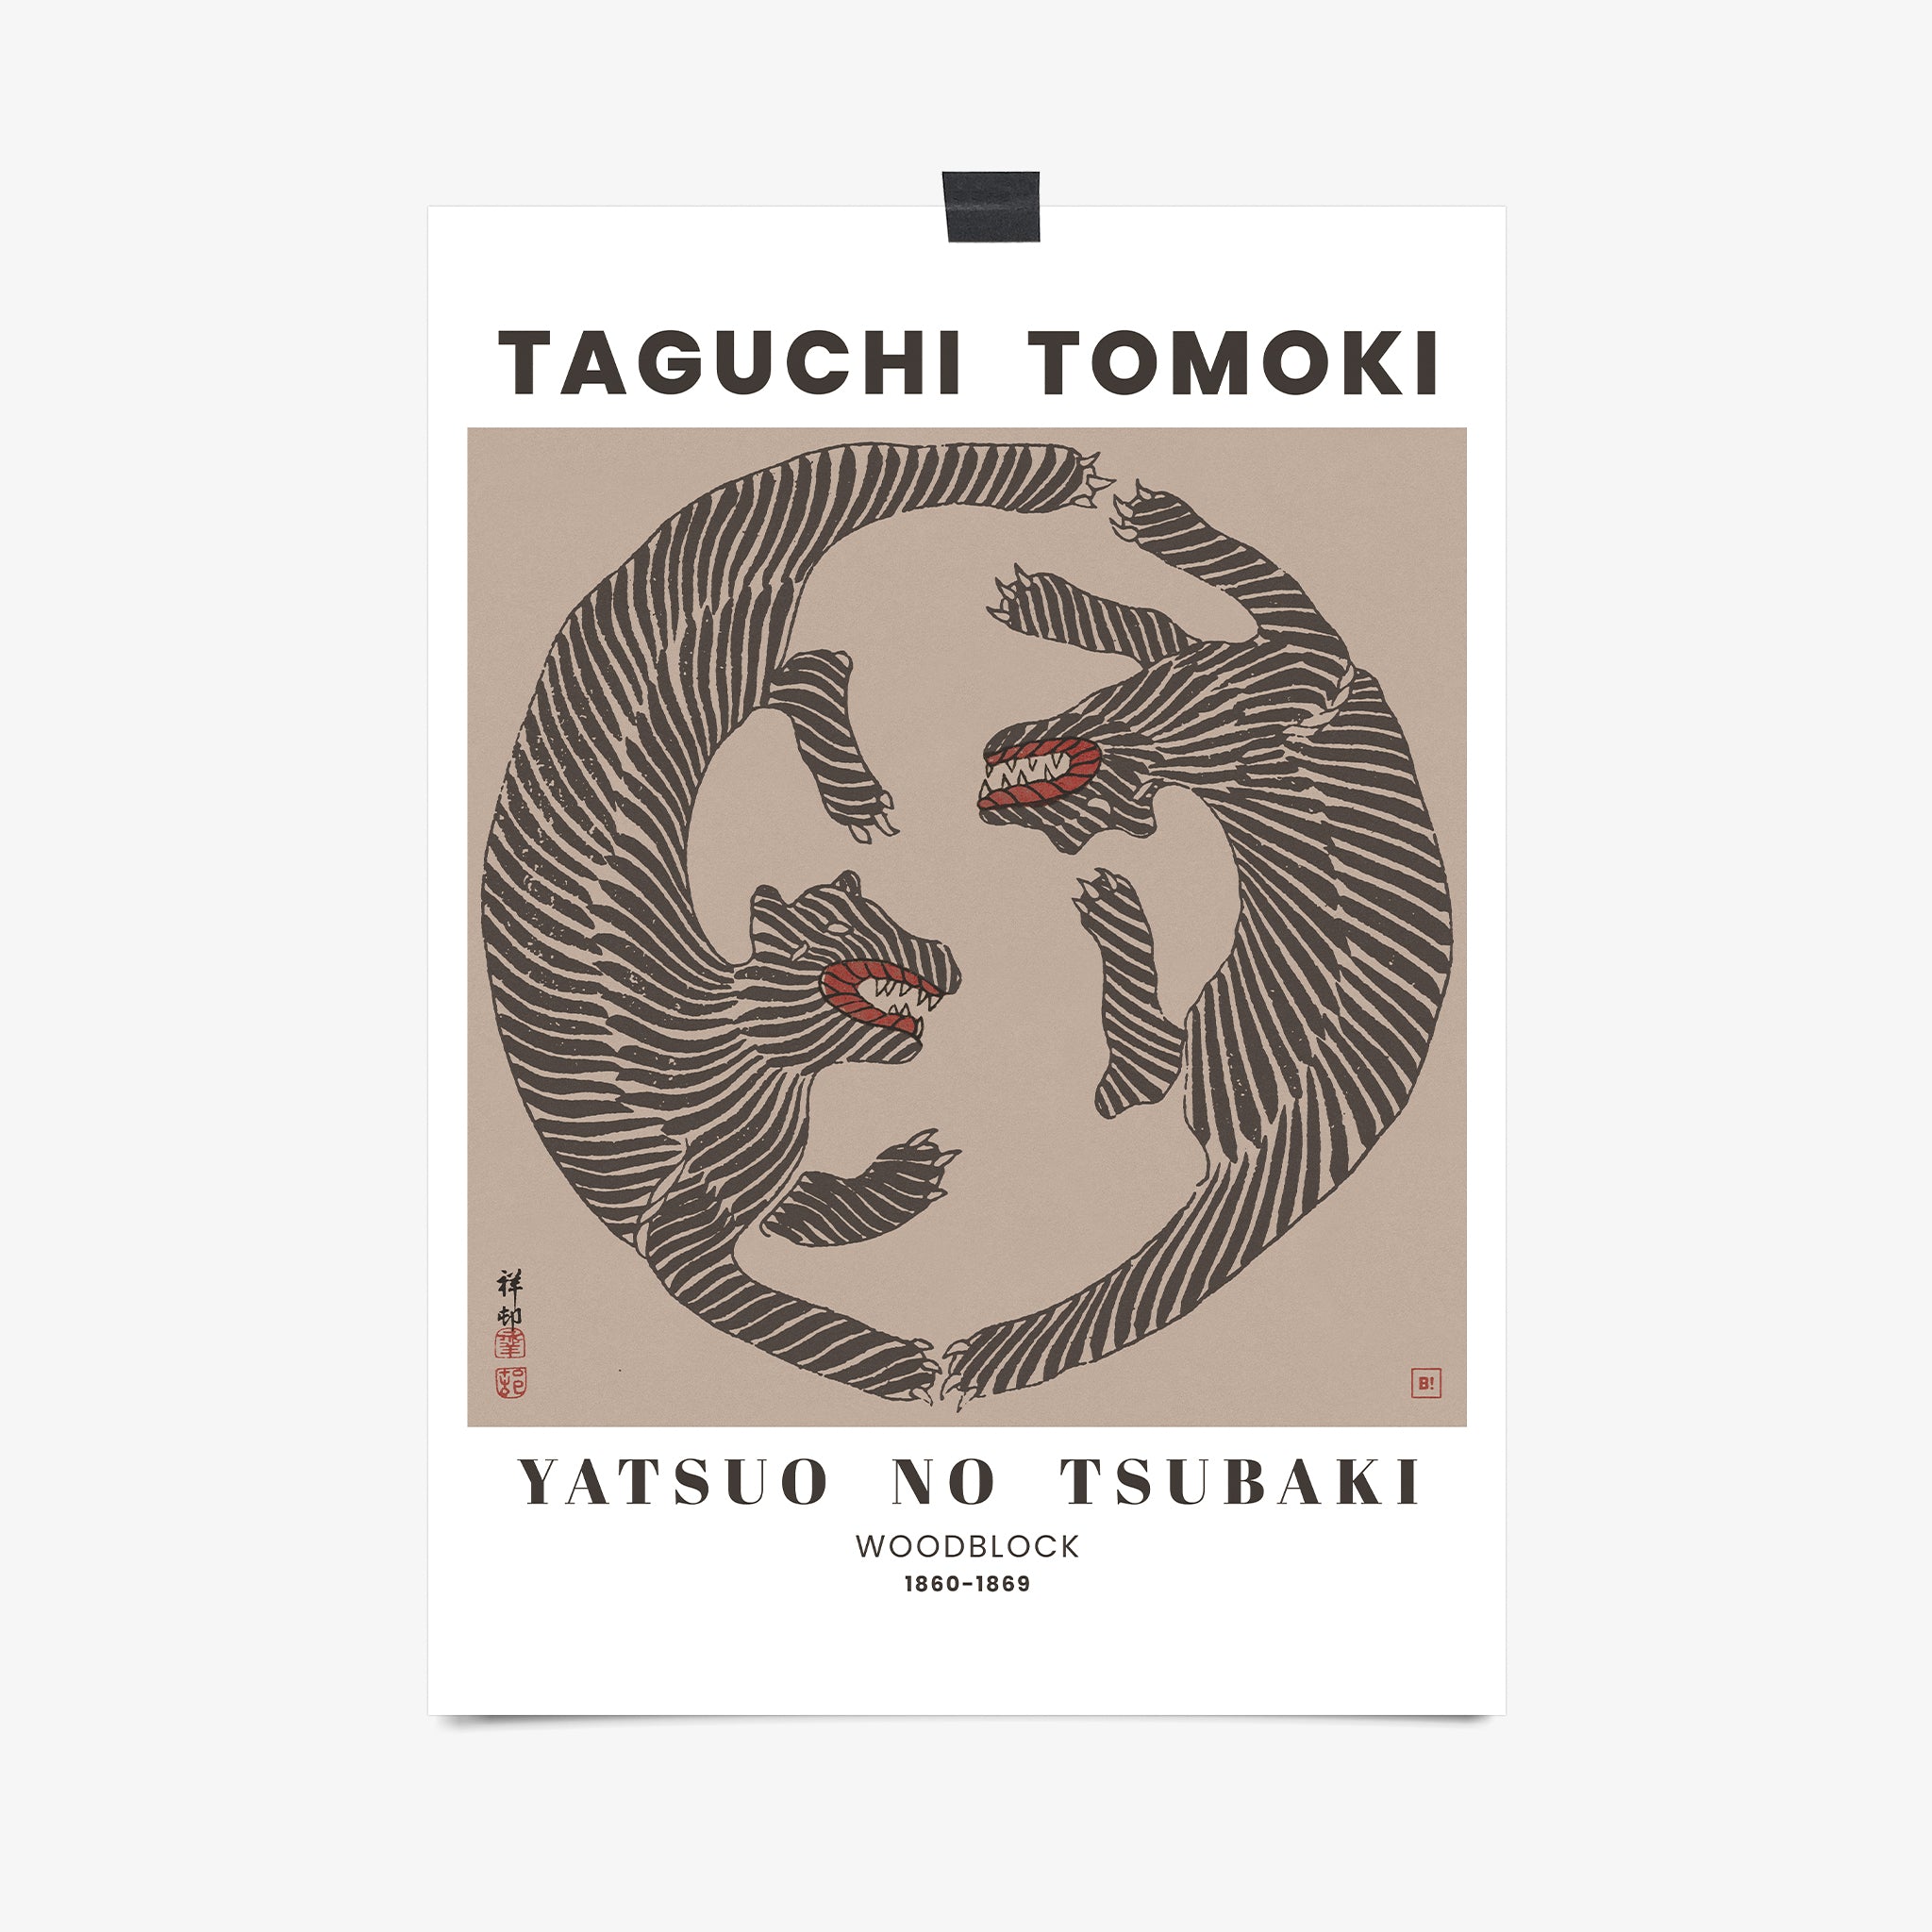 Be inspired by our remastered Taguchi Tomoki Woodblock Tigers Terracotta exhibition art print. This artwork was printed using the giclée process on archival acid-free paper that captures its timeless beauty in every detail.